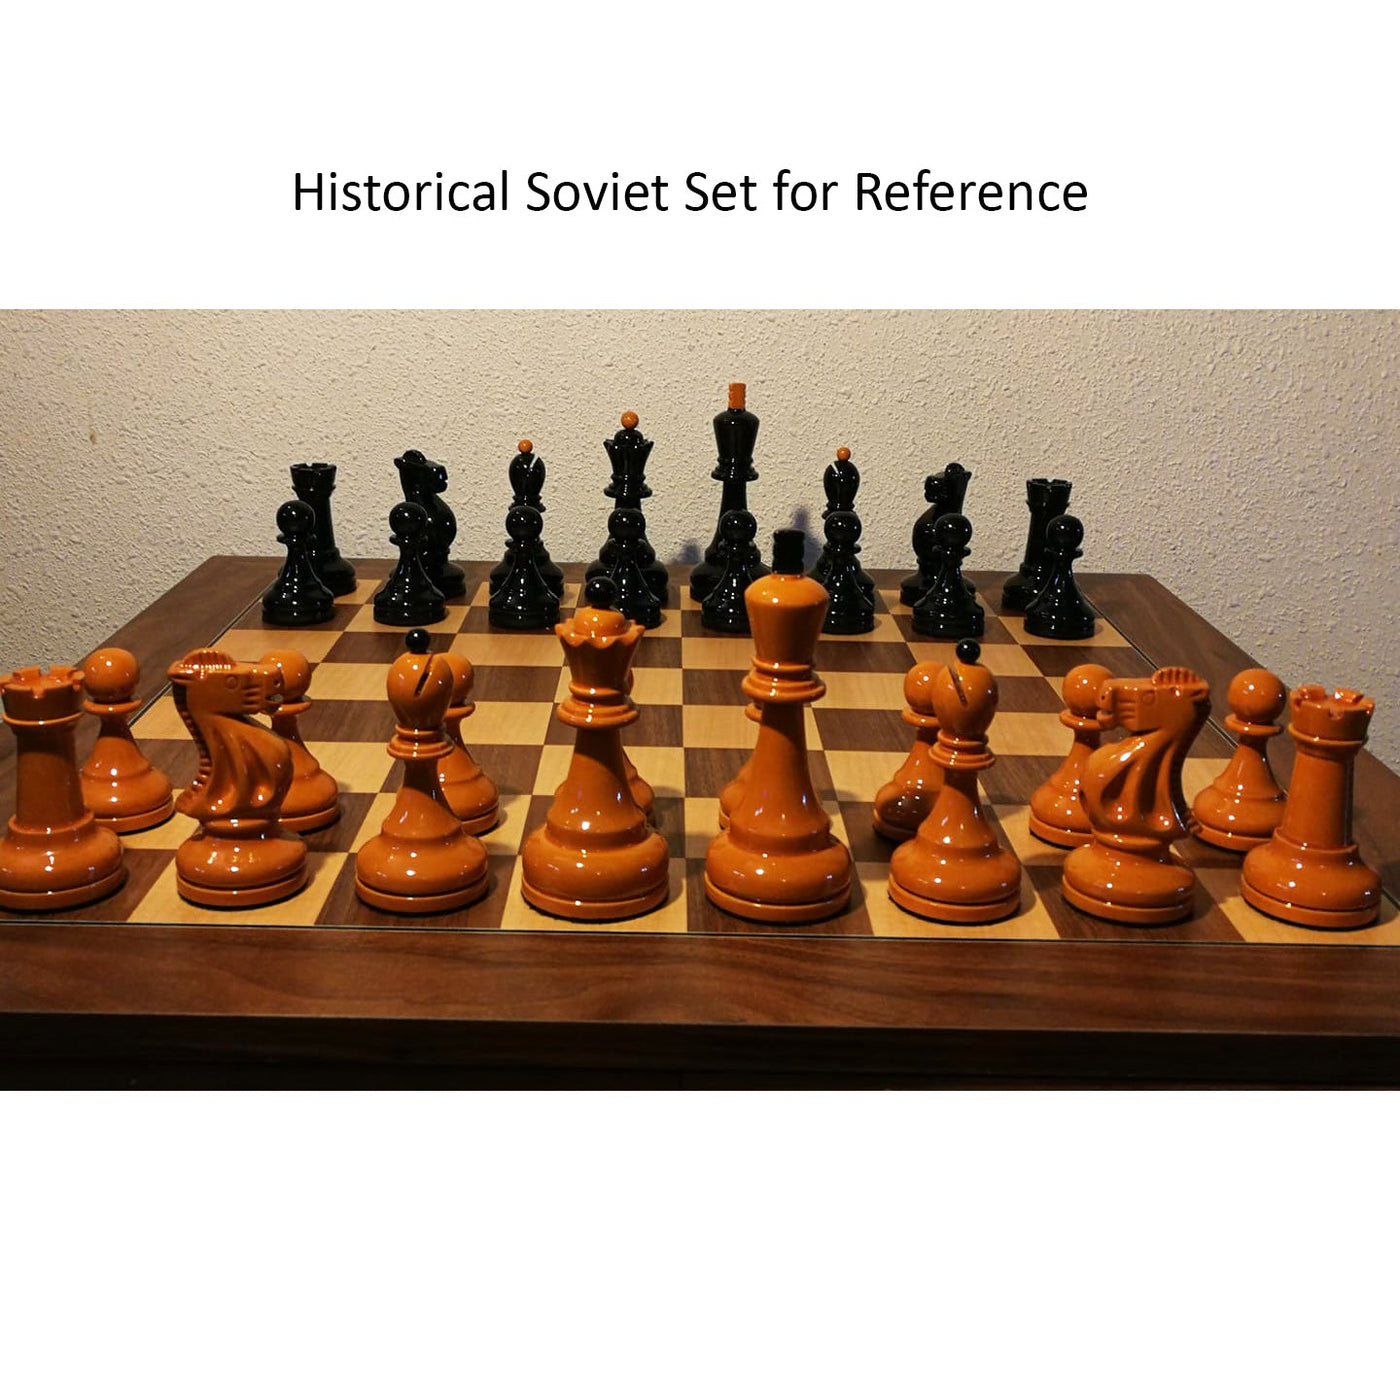 Slightly Imperfect 3.7" Soviet Grandmaster Supreme Chess Set - Chess Pieces Only in Boxwood- Glass Eyes